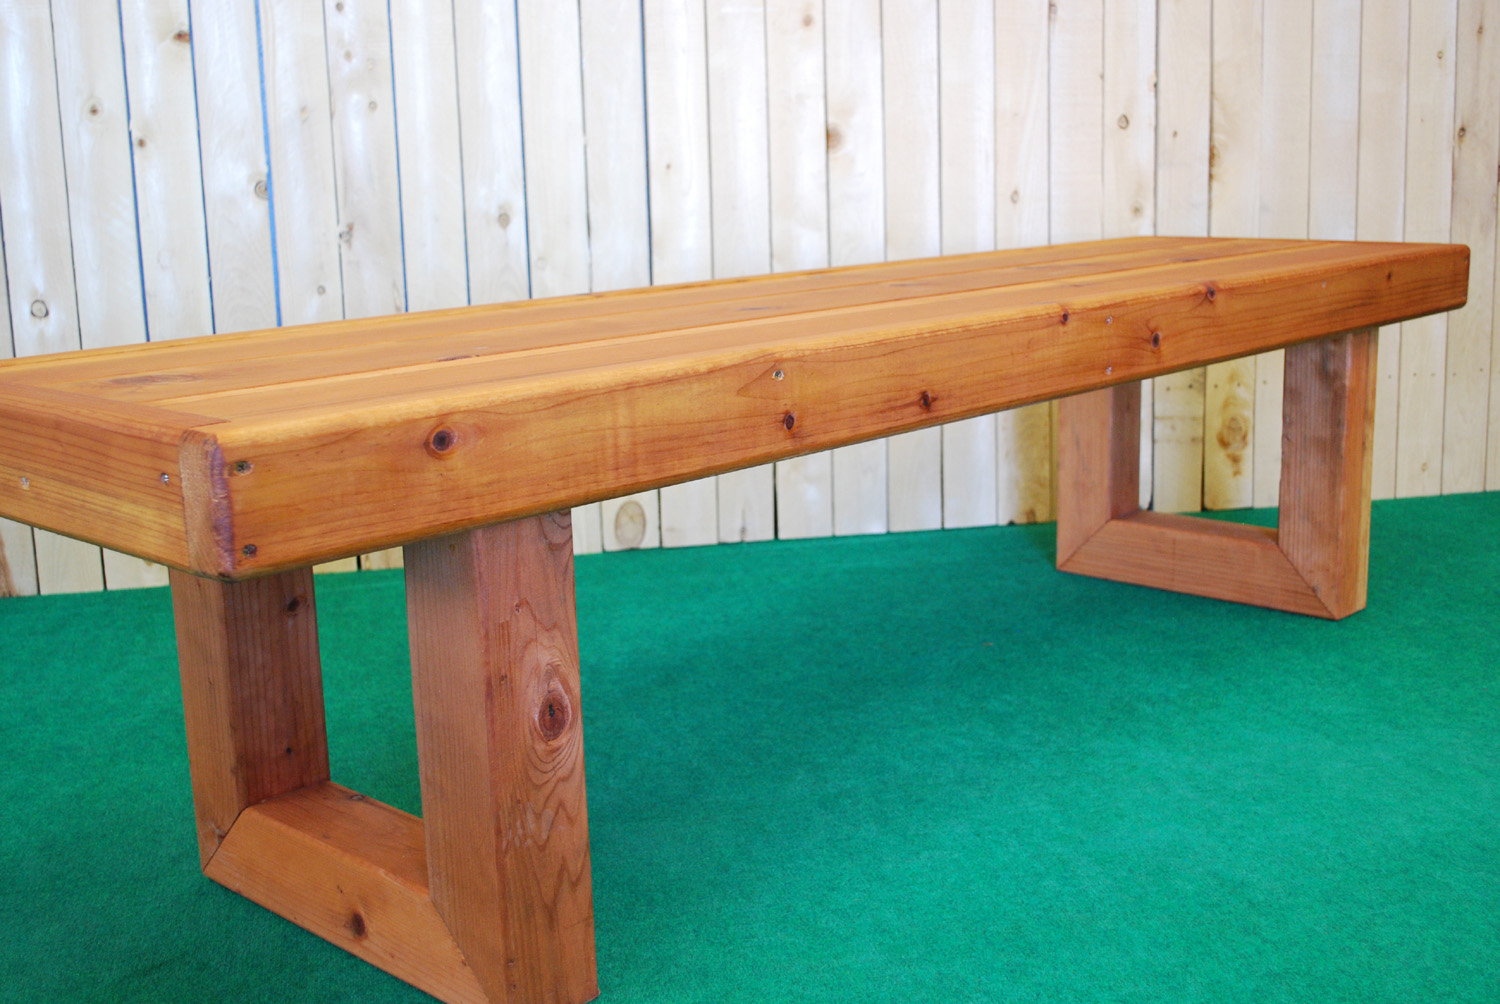 redwood contempo bench (large)